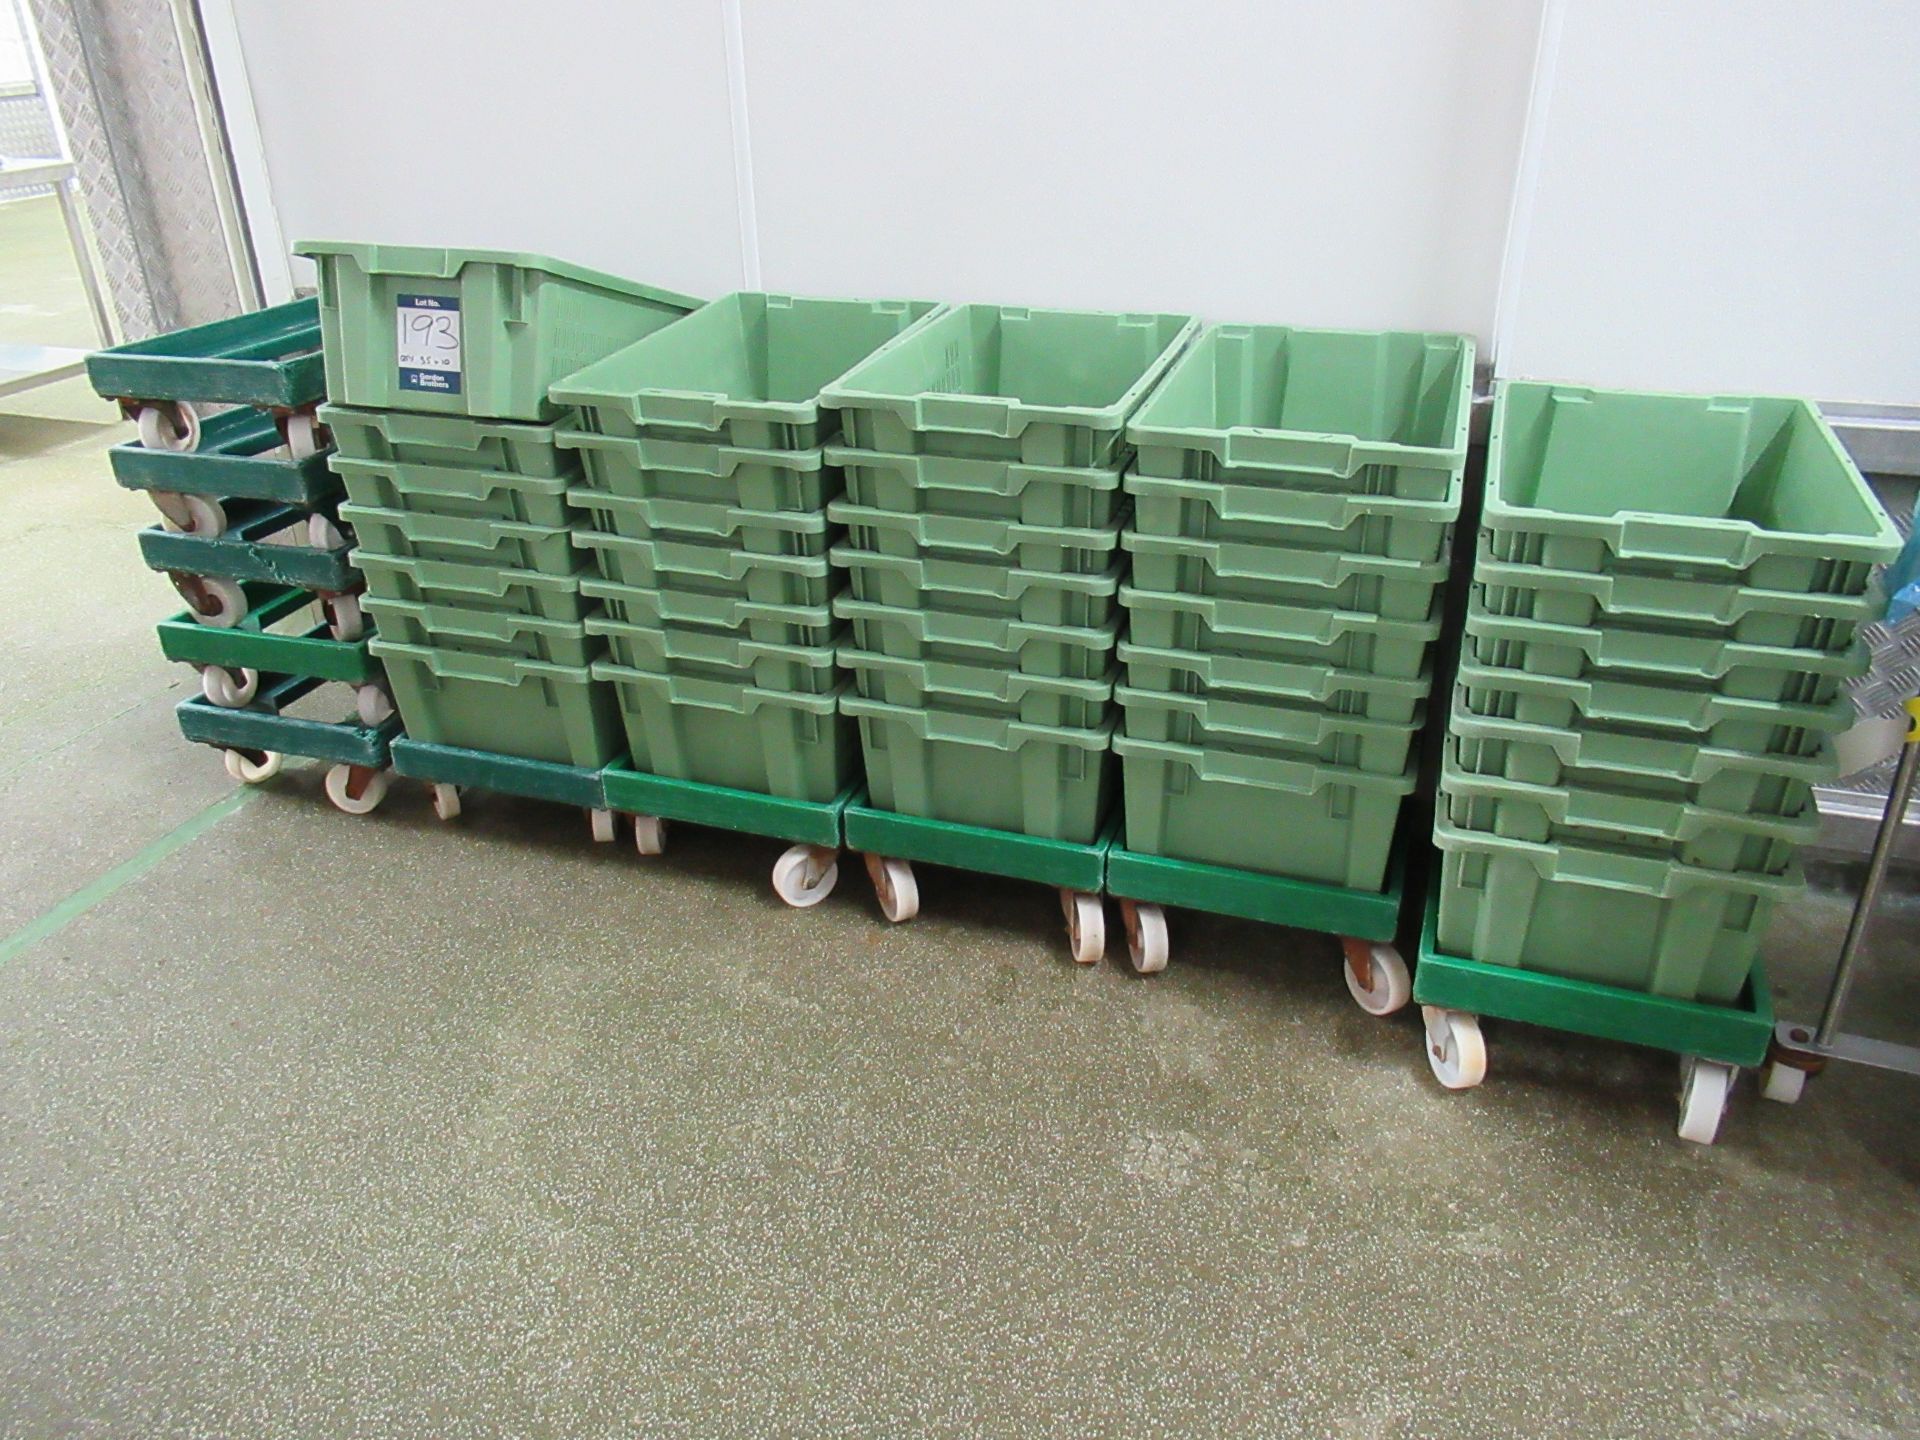 35 Green plastic stacking boxes with 10 dollies